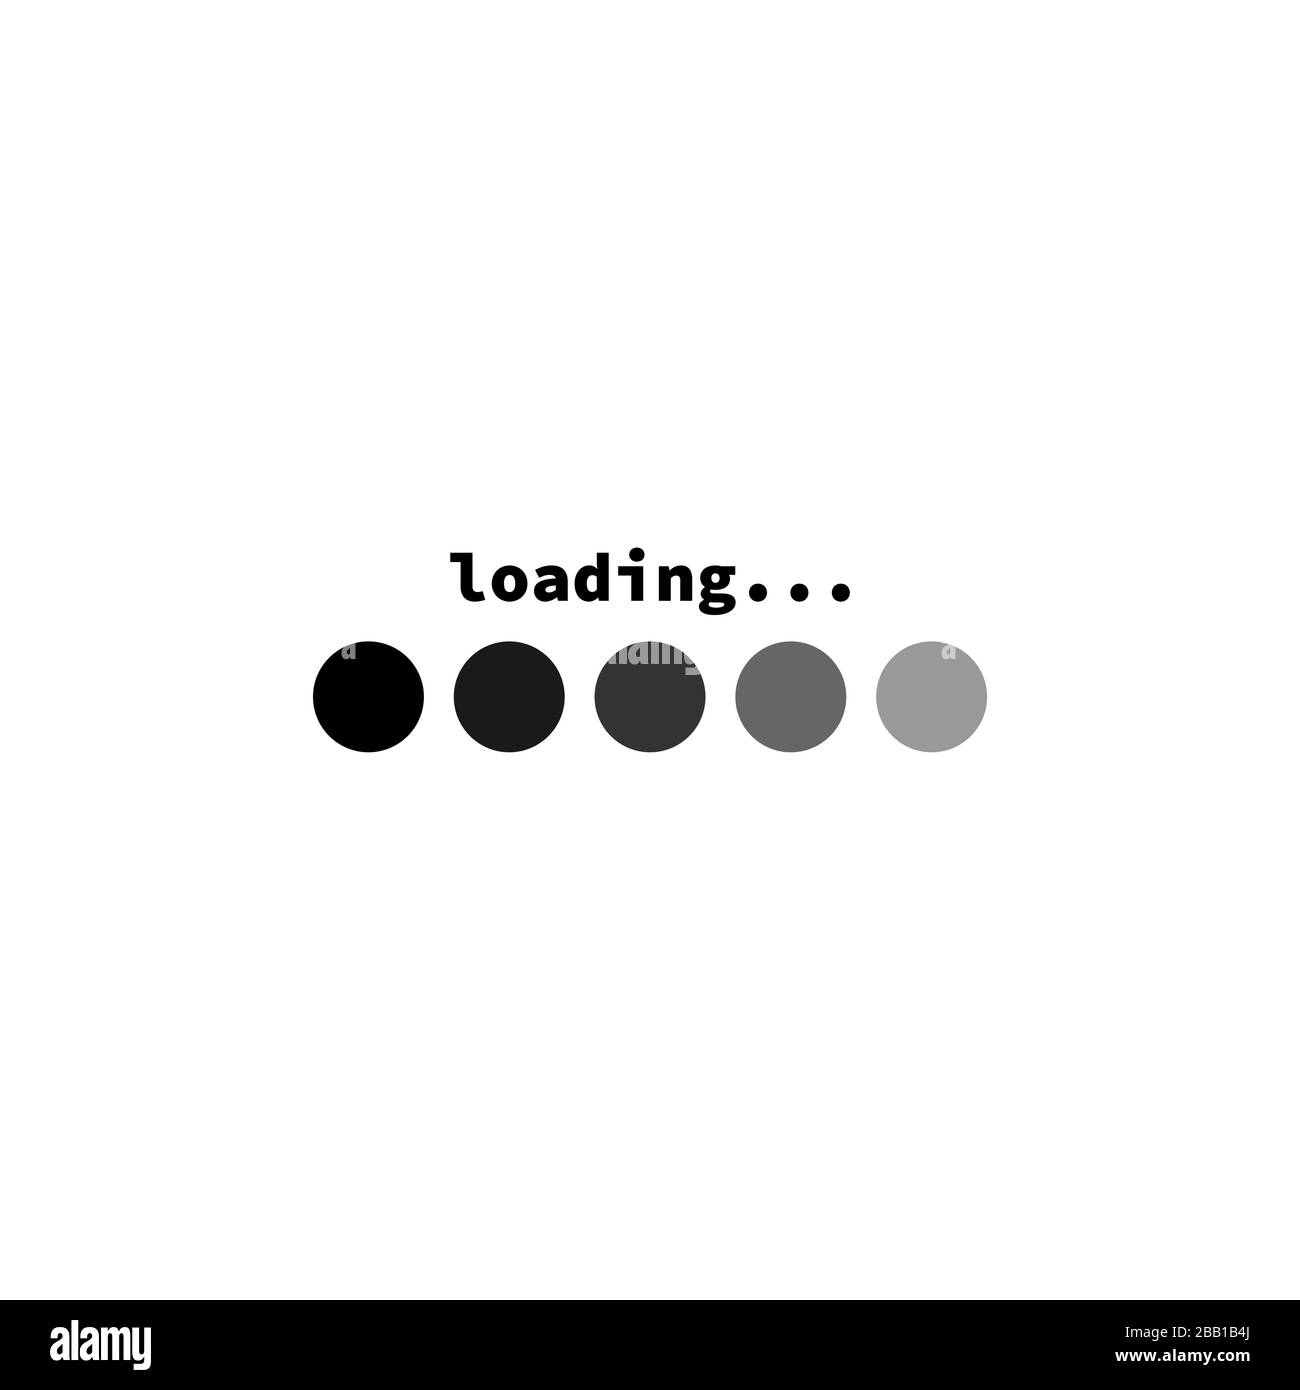 Loading Comments - 99 Percent Loading Gif - Free Transparent PNG Clipart  Images Download